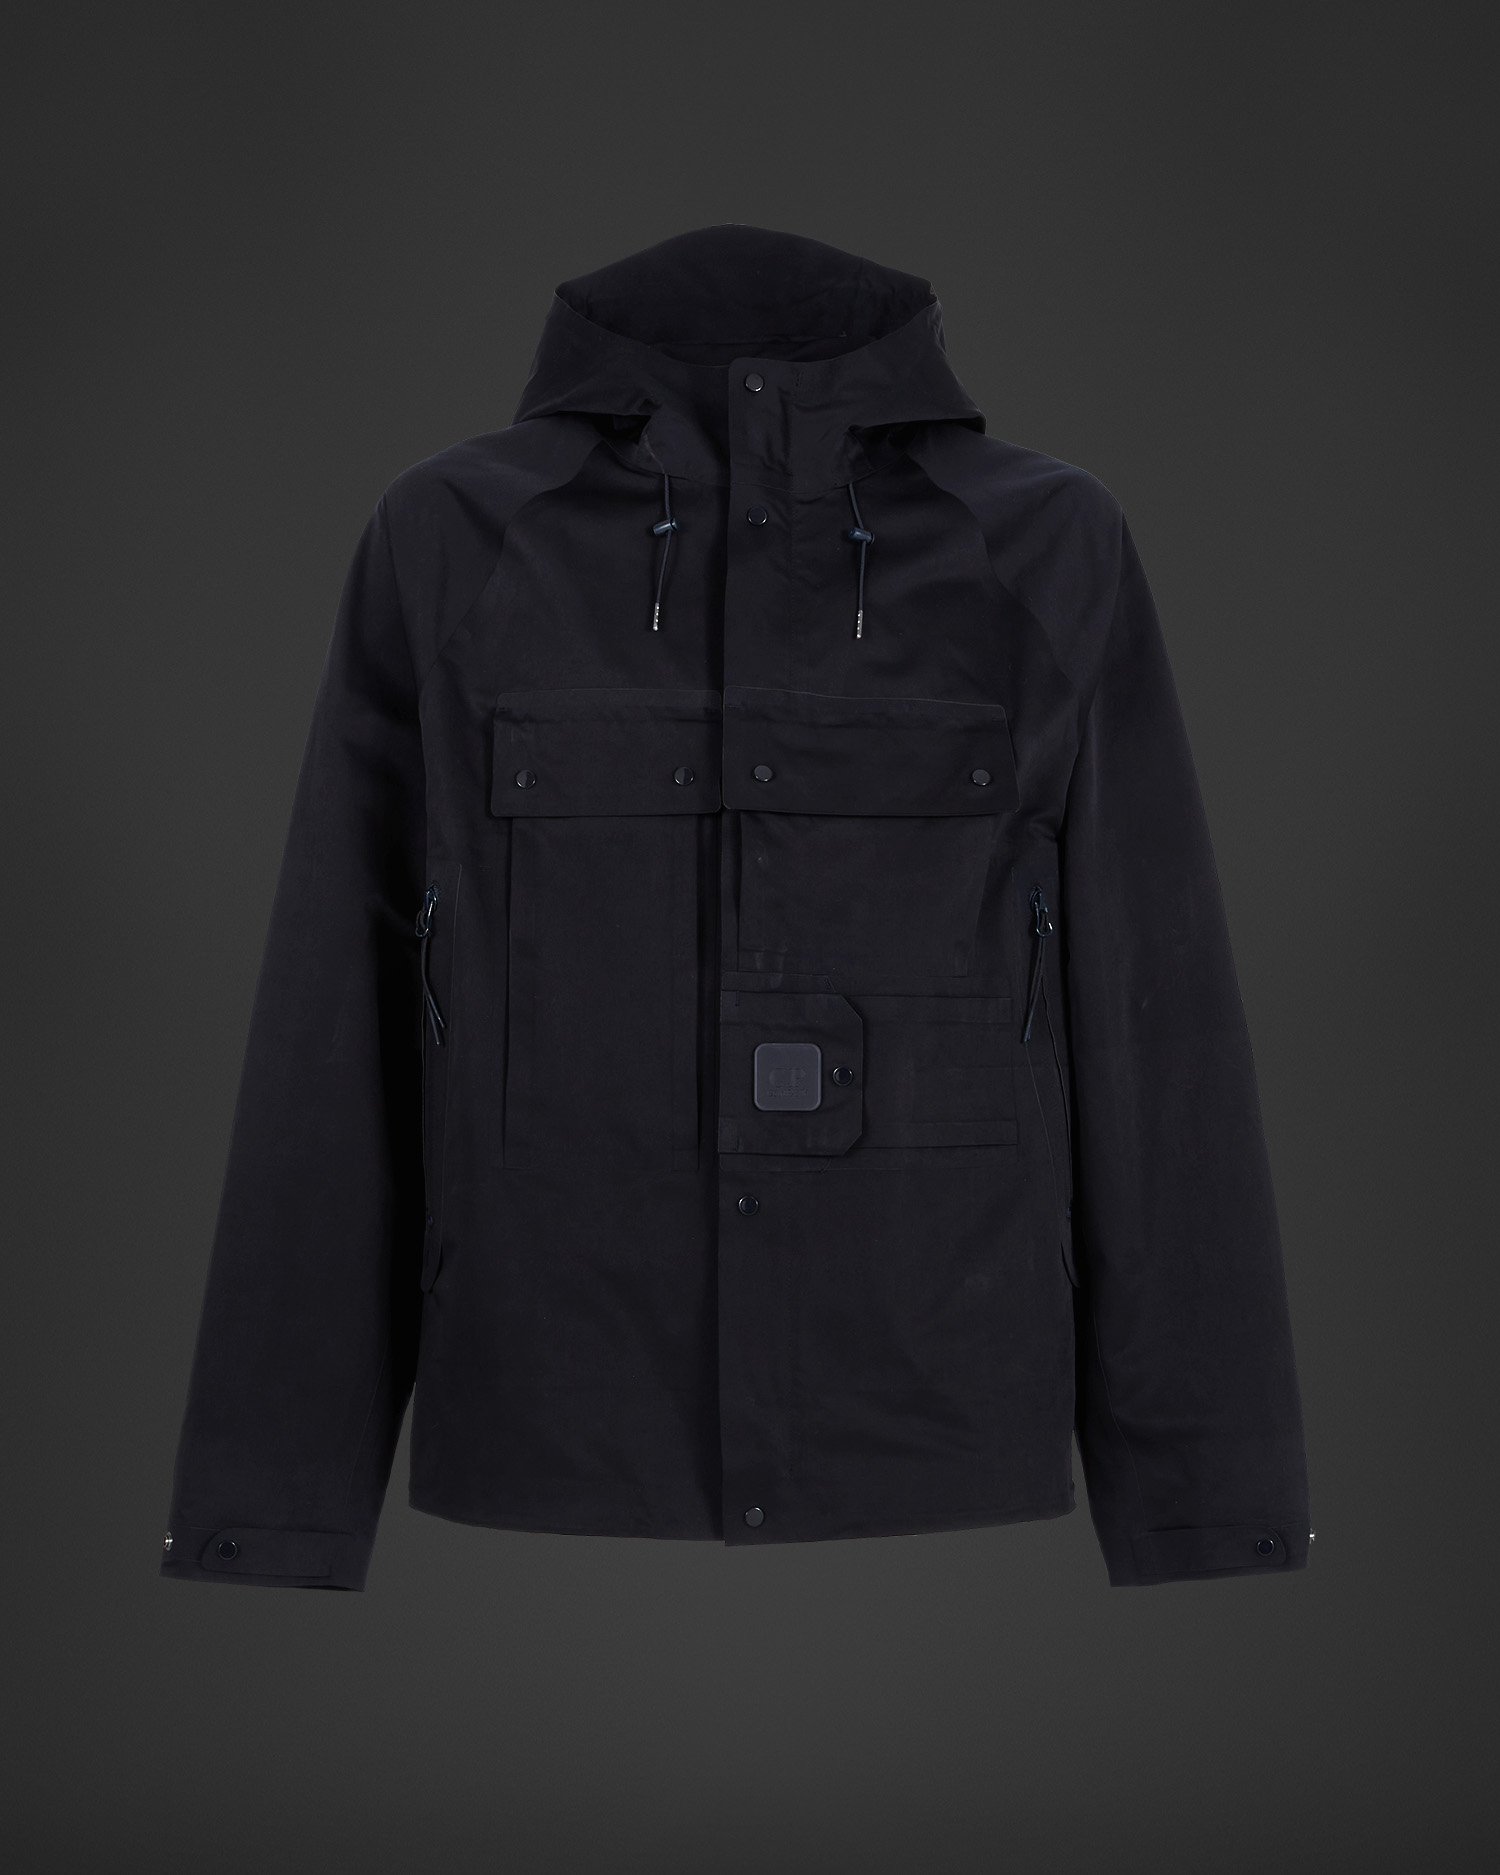 Metropolis Series A.A.C. Hooded Jacket | C.P. Company Online Store